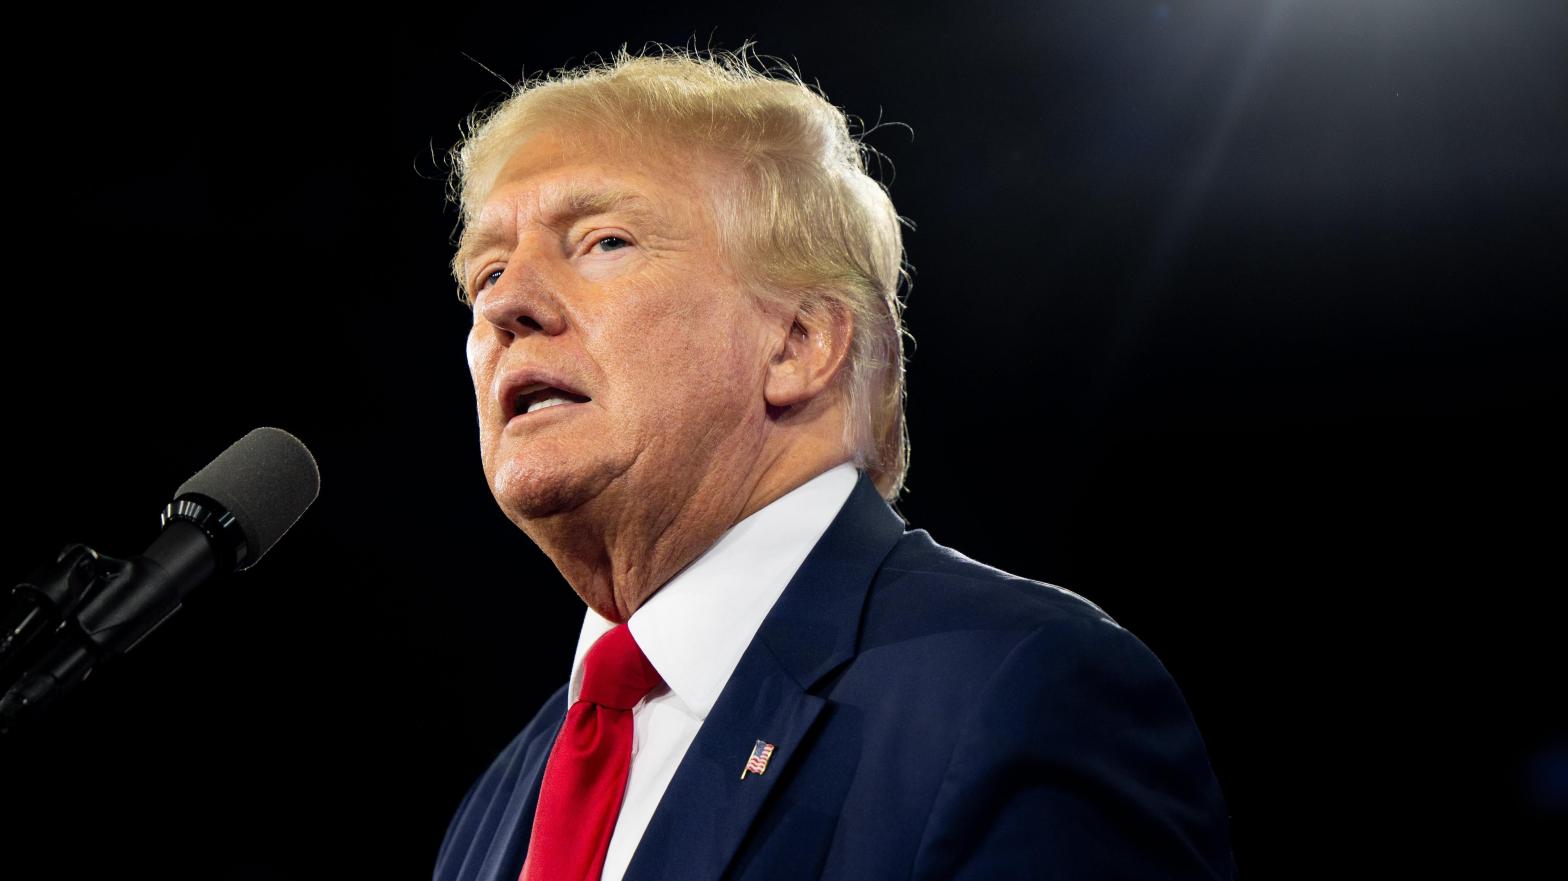 Former U.S. president and known threat to the safety and security of the United States, Donald Trump, speaks on August 6, 2022  in Dallas, Texas. (Photo: Brandon Bell, Getty Images)